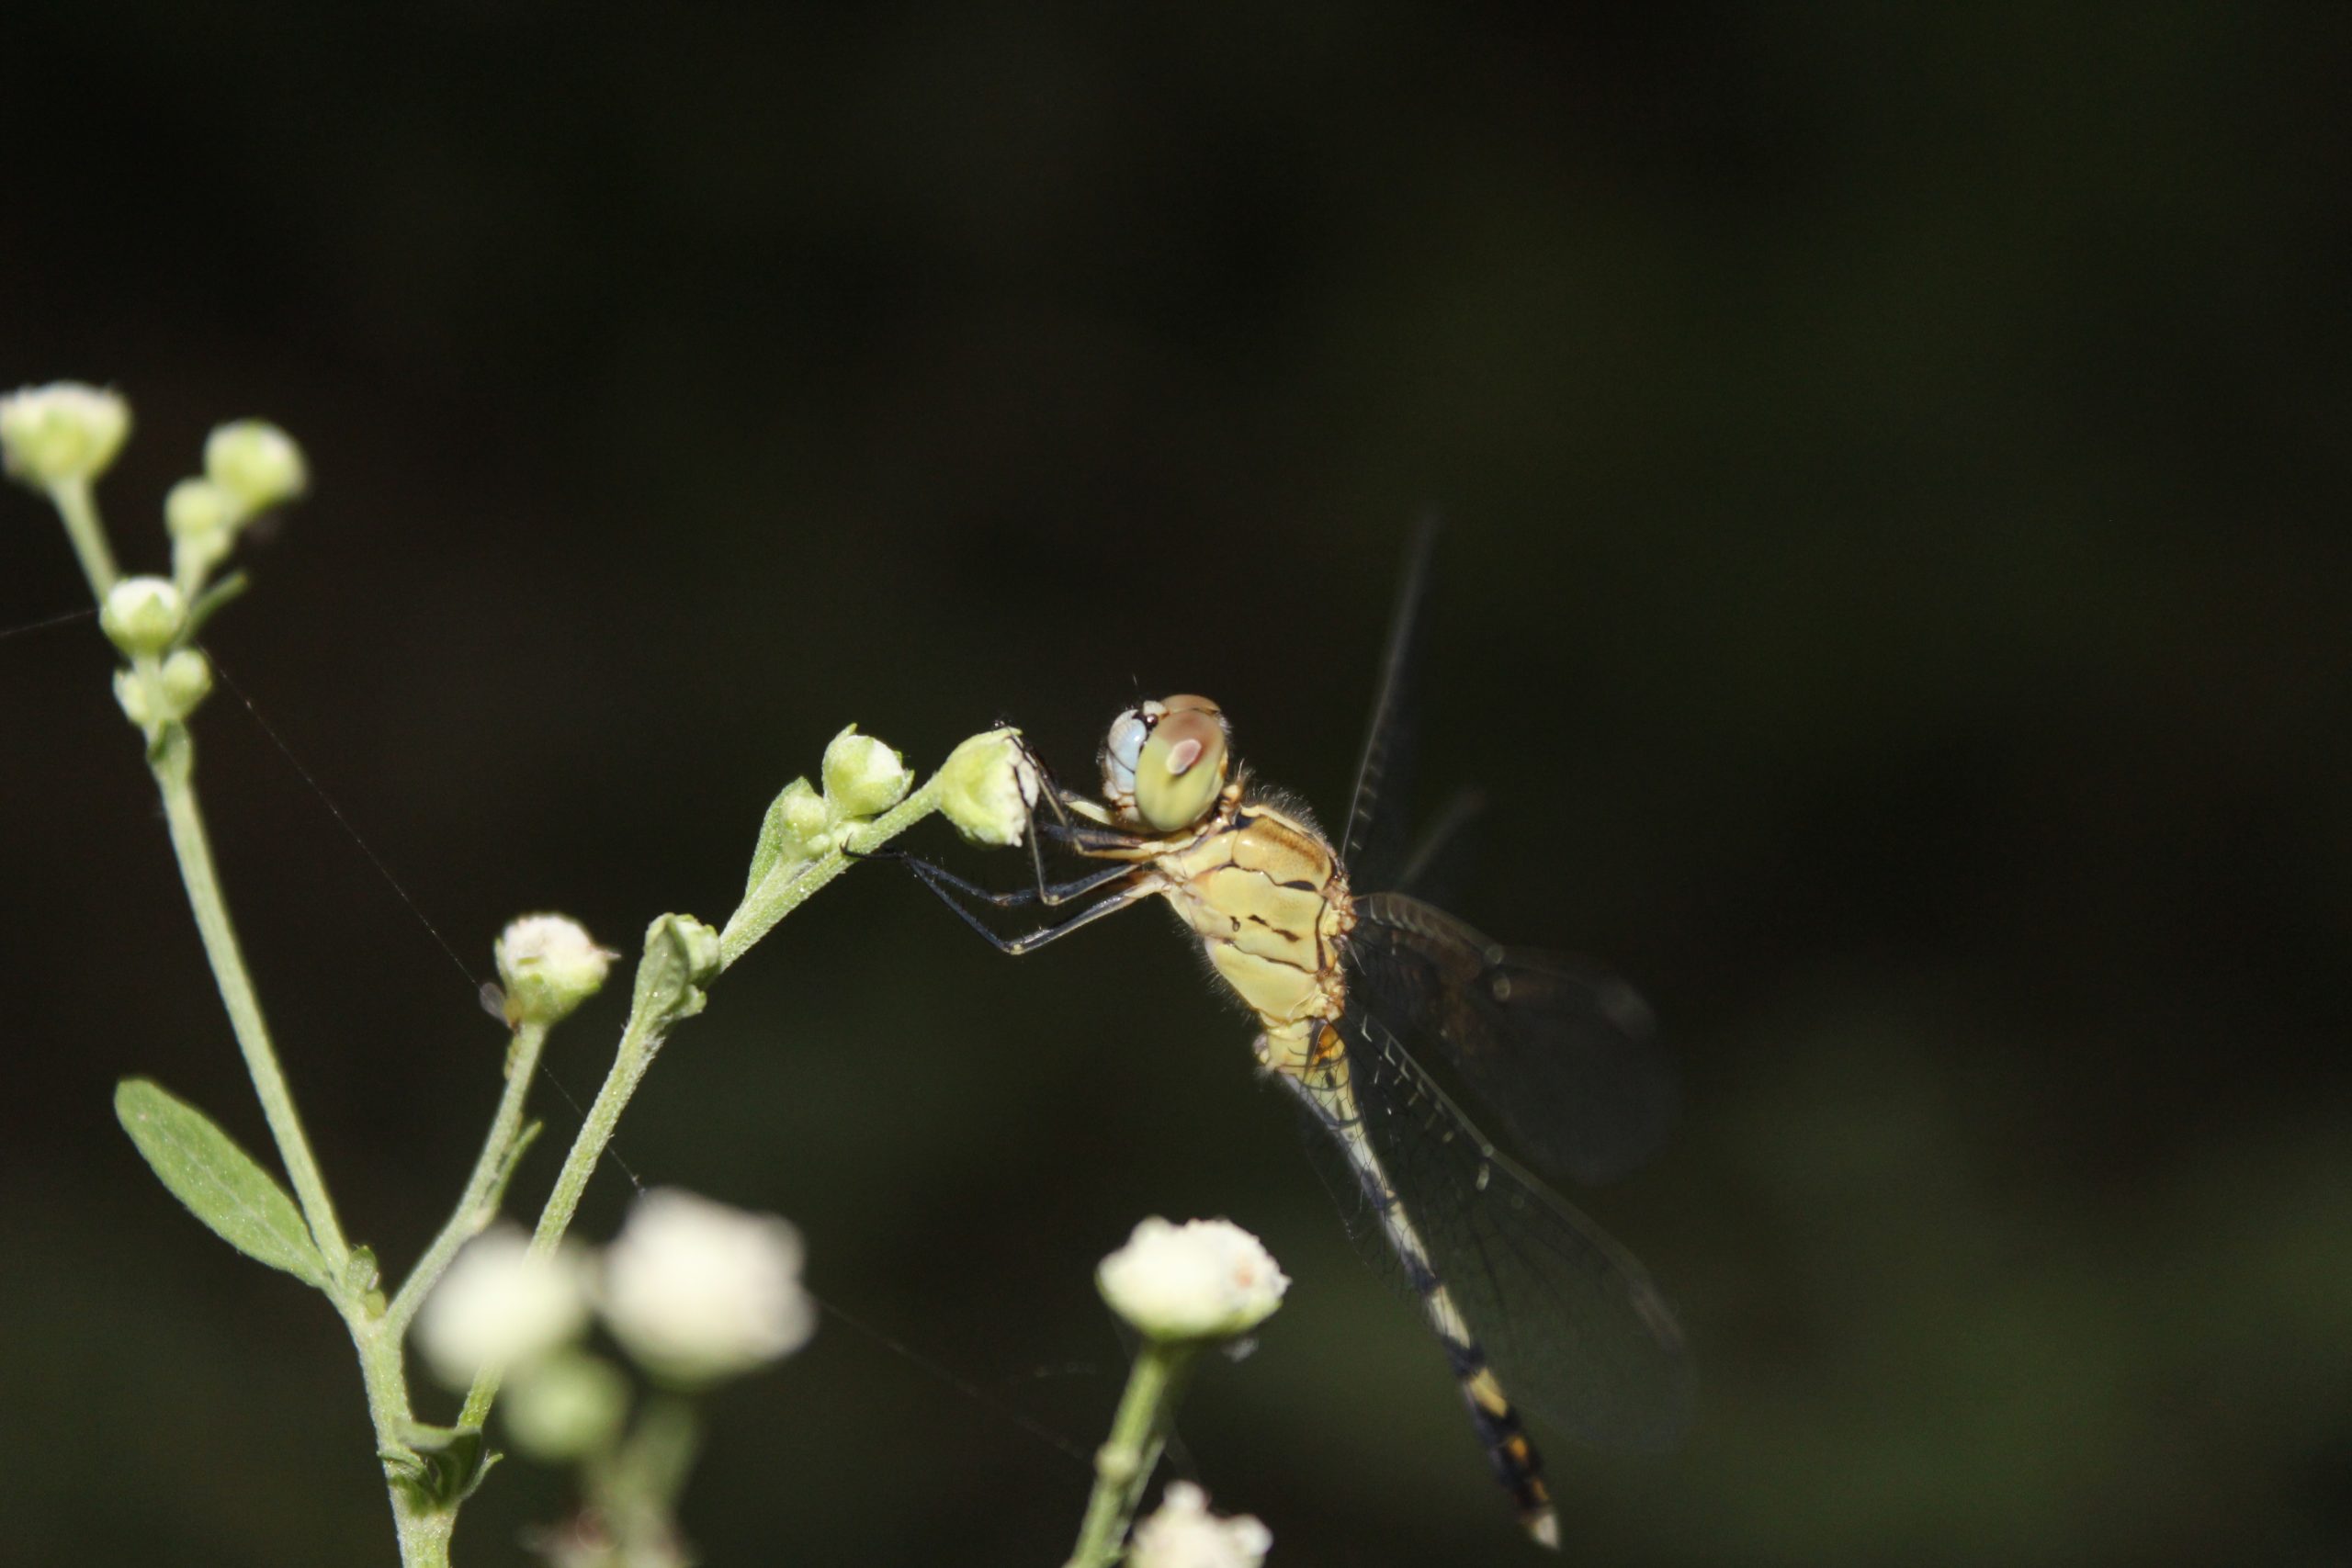 Dragonfly Close-up